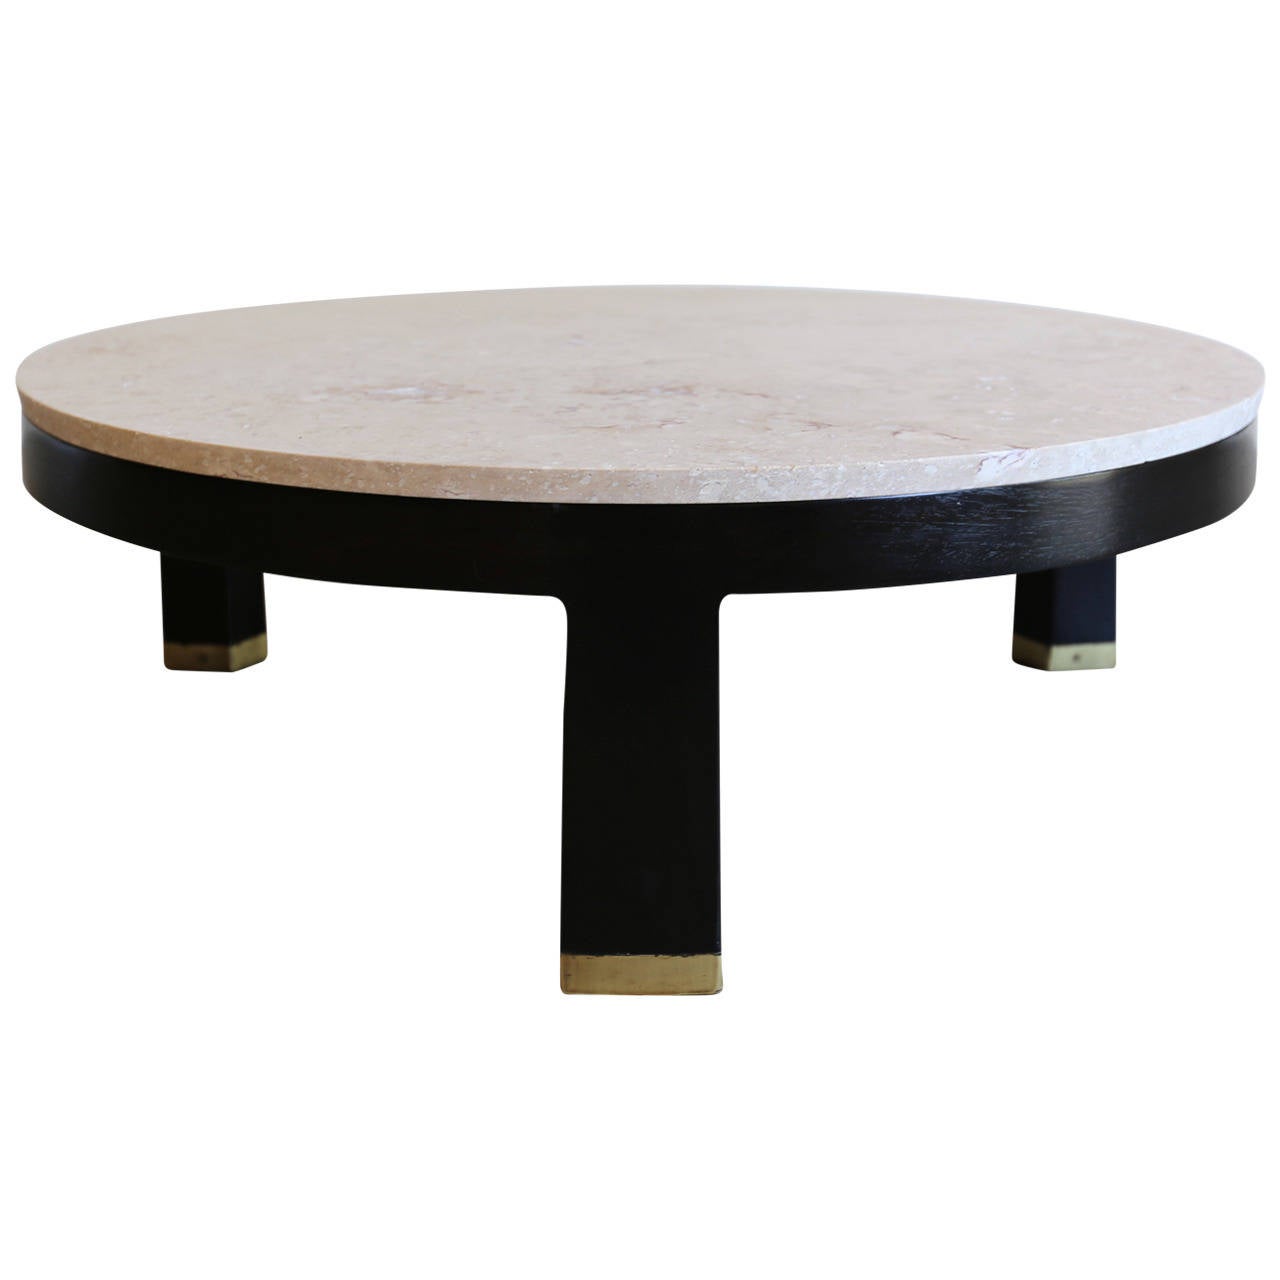 Travertine Coffee Tables / Travertine and Sculptural Walnut Coffee Table at 1stdibs / The curved travertine top of this marin oval coffee table strikingly contrasts with the delicate lines of its wood base.